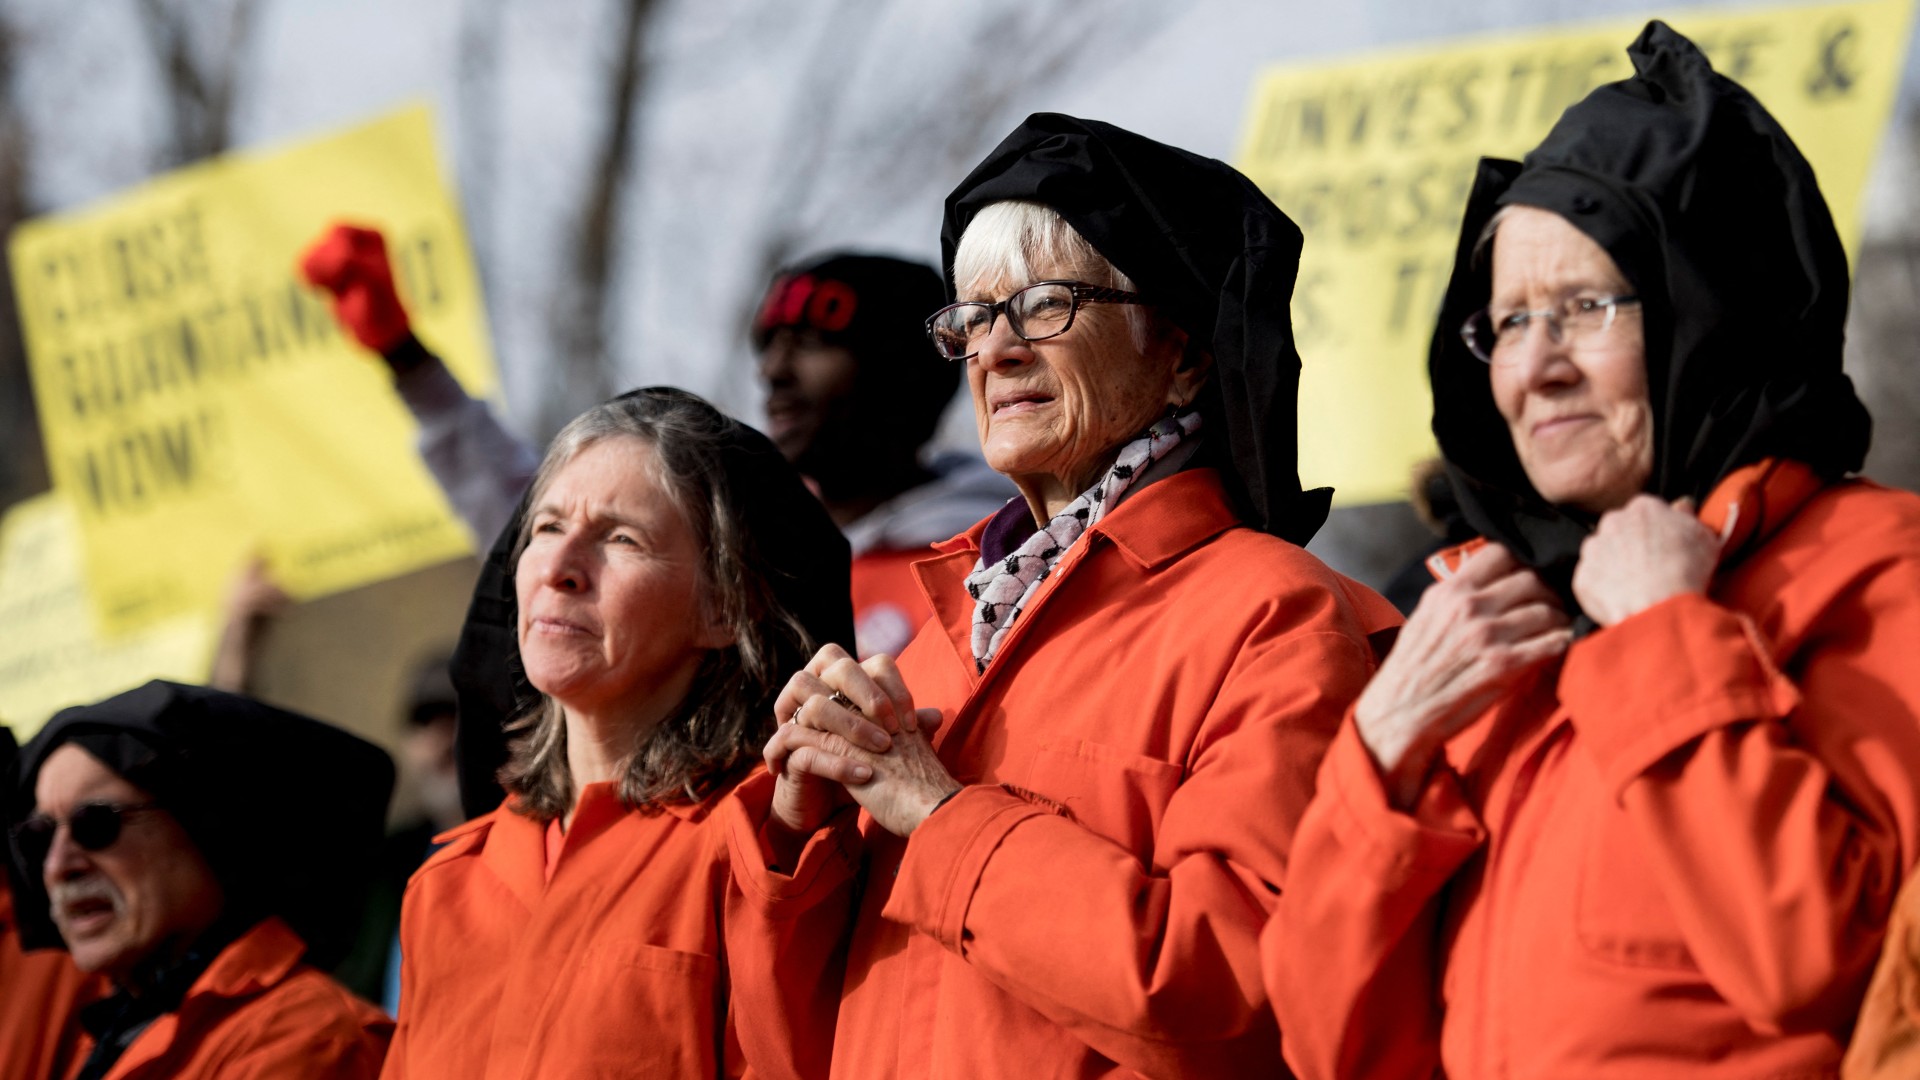 Activists protest the Guantanamo Bay detention camp during a rally in Lafayette Square outside the White House in Washington, DC on on 11 January 2018 (AFP)